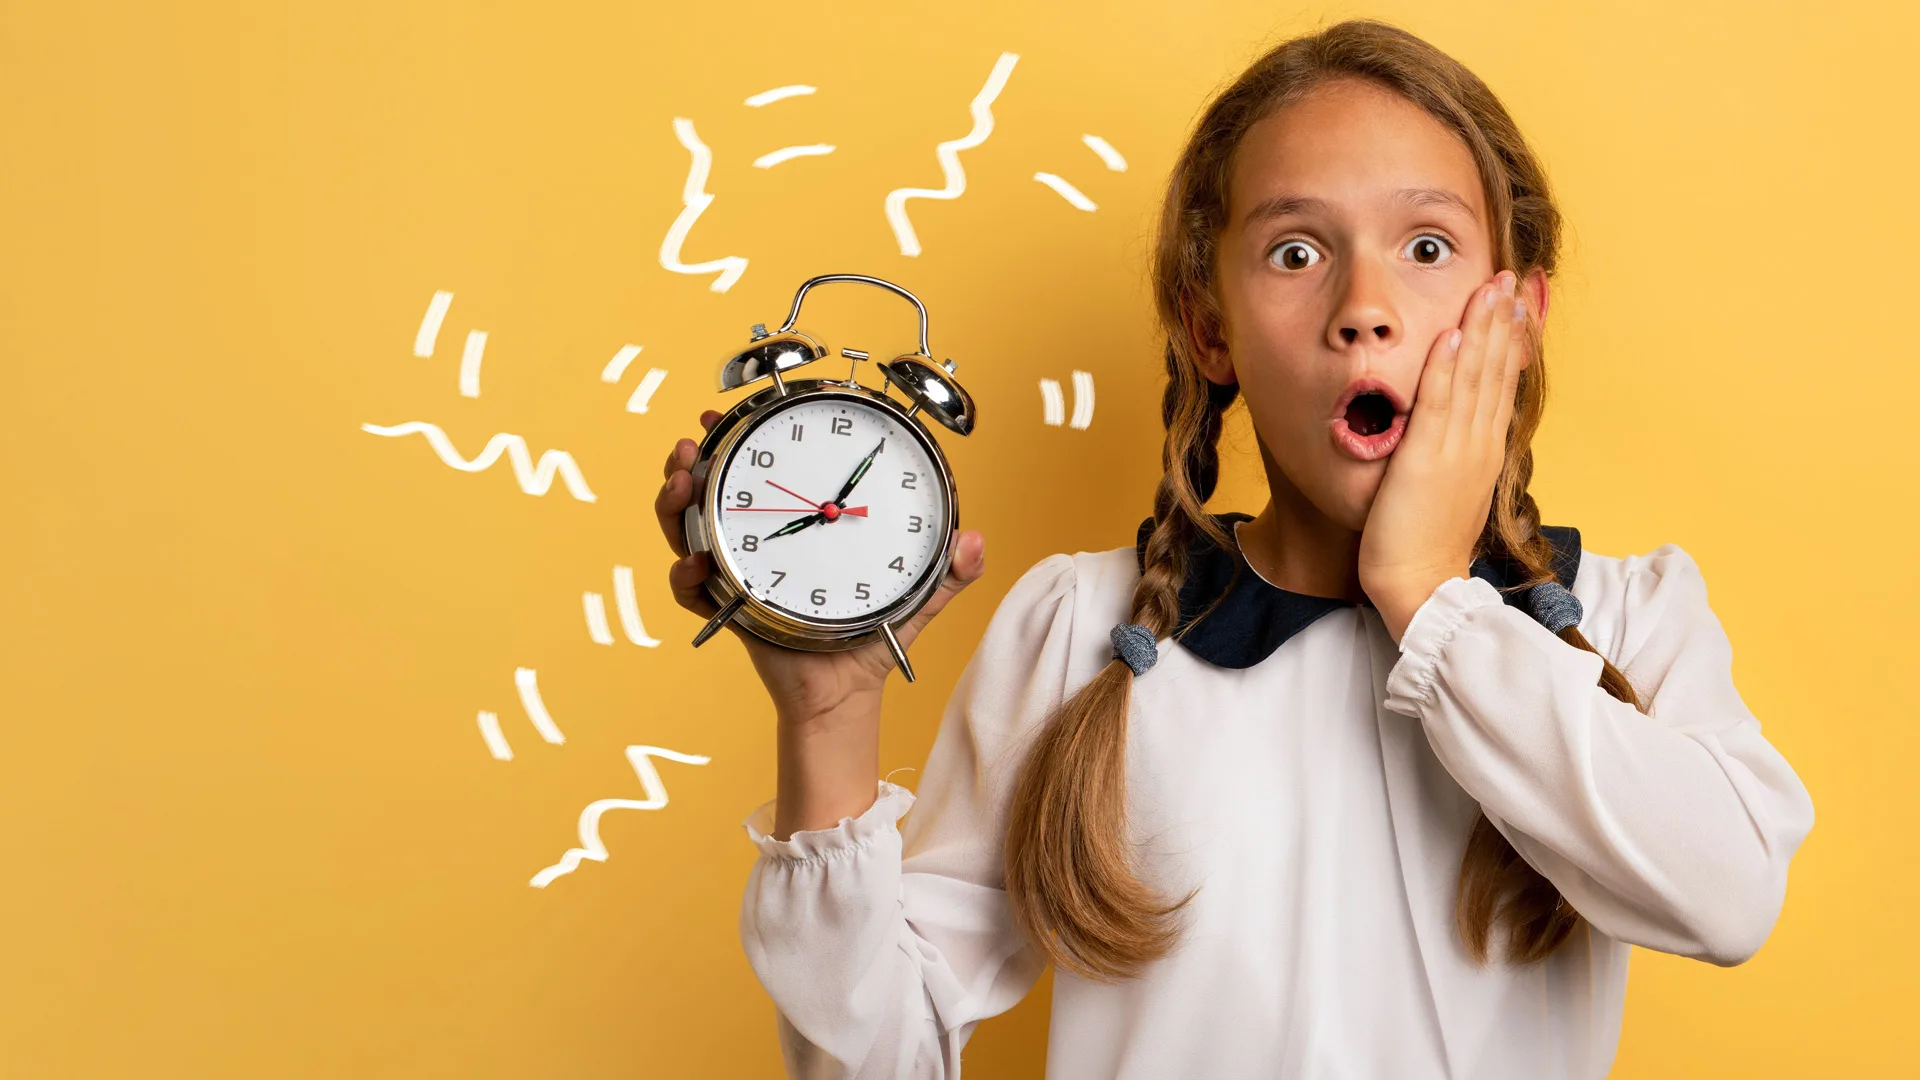 A photograph of a girl holding a clock looking shocked with white squiggly lines around the clock against a yellow background